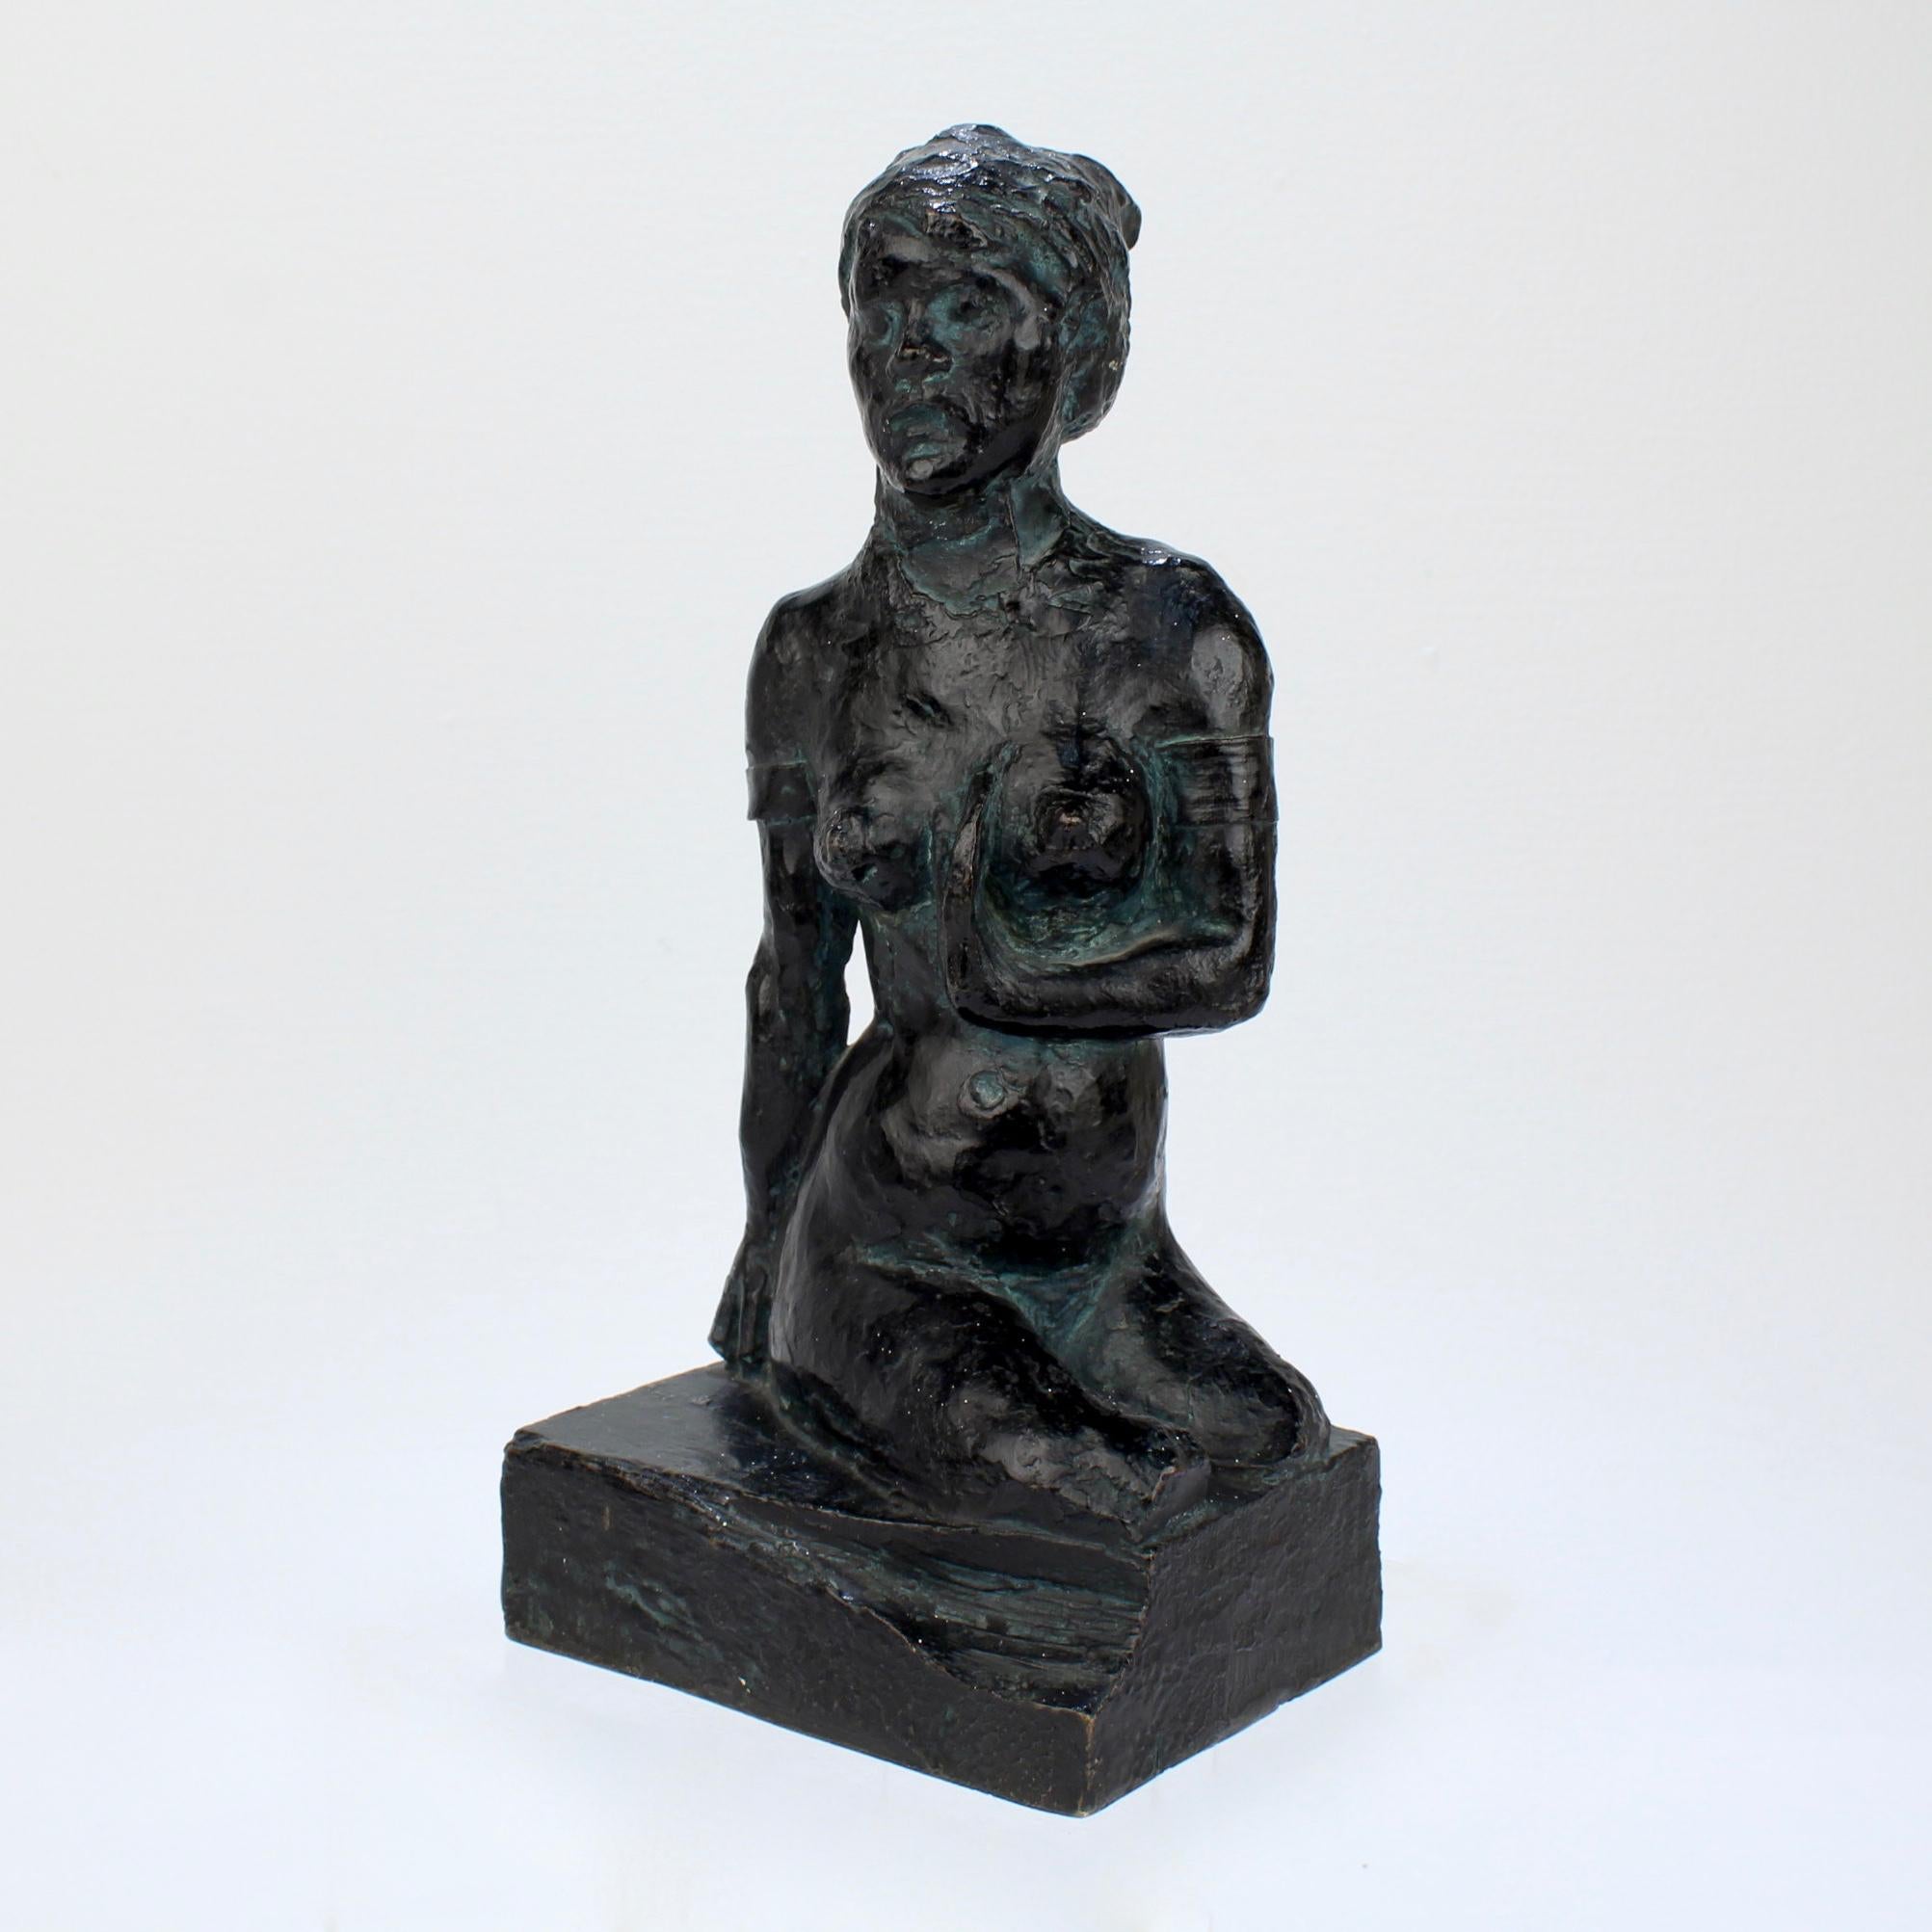 A very fine bronze of the 'Martiniquaise' or 'Woman of Martinique' sculpture after Paul Gauguin.

This bronze was modeled after the 'Woman of Martinique' or 'Femme de la Martinique' held in the Pearlman collection. 

It was cast by the Valsuani